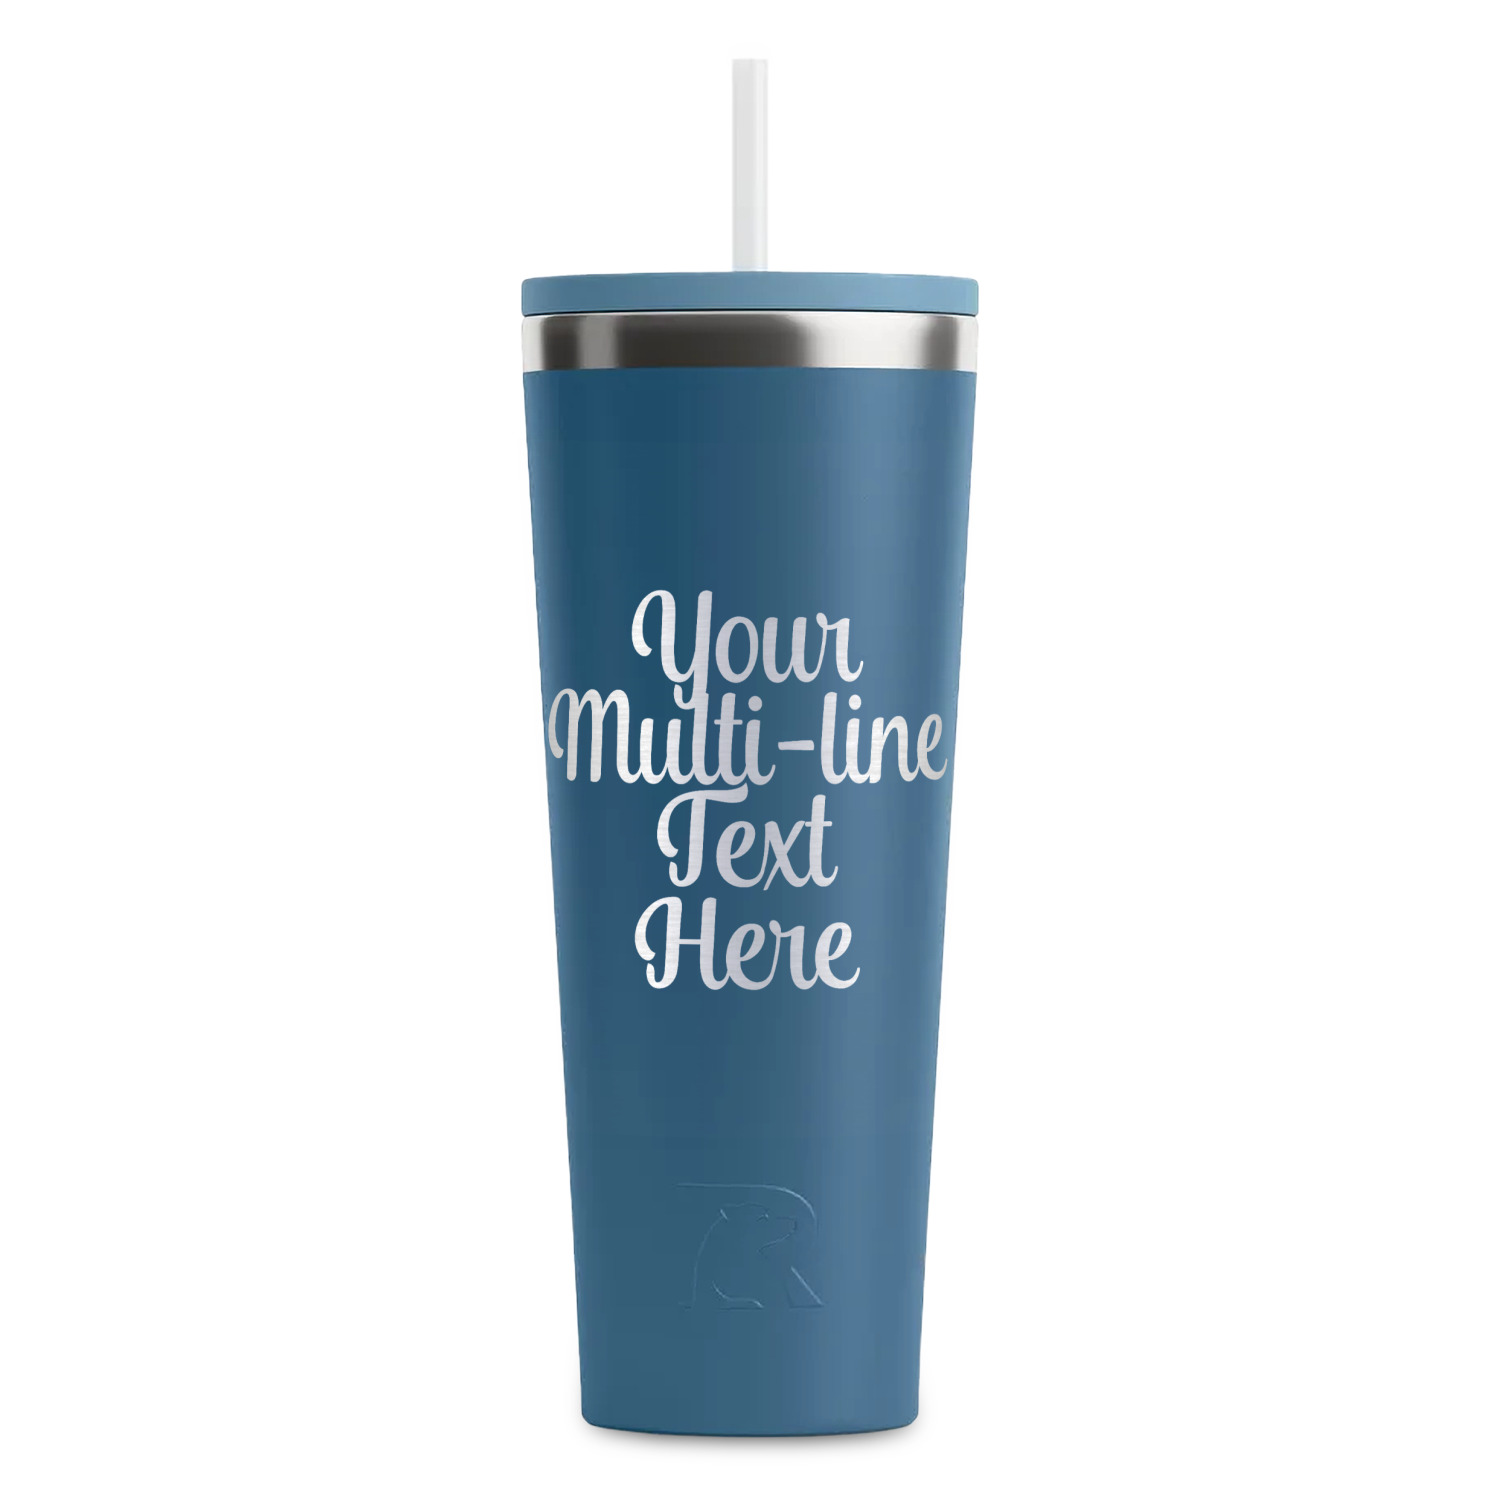 30 Oz. RTIC TUMBLER Personalized With Laser Engraved Name Phrase